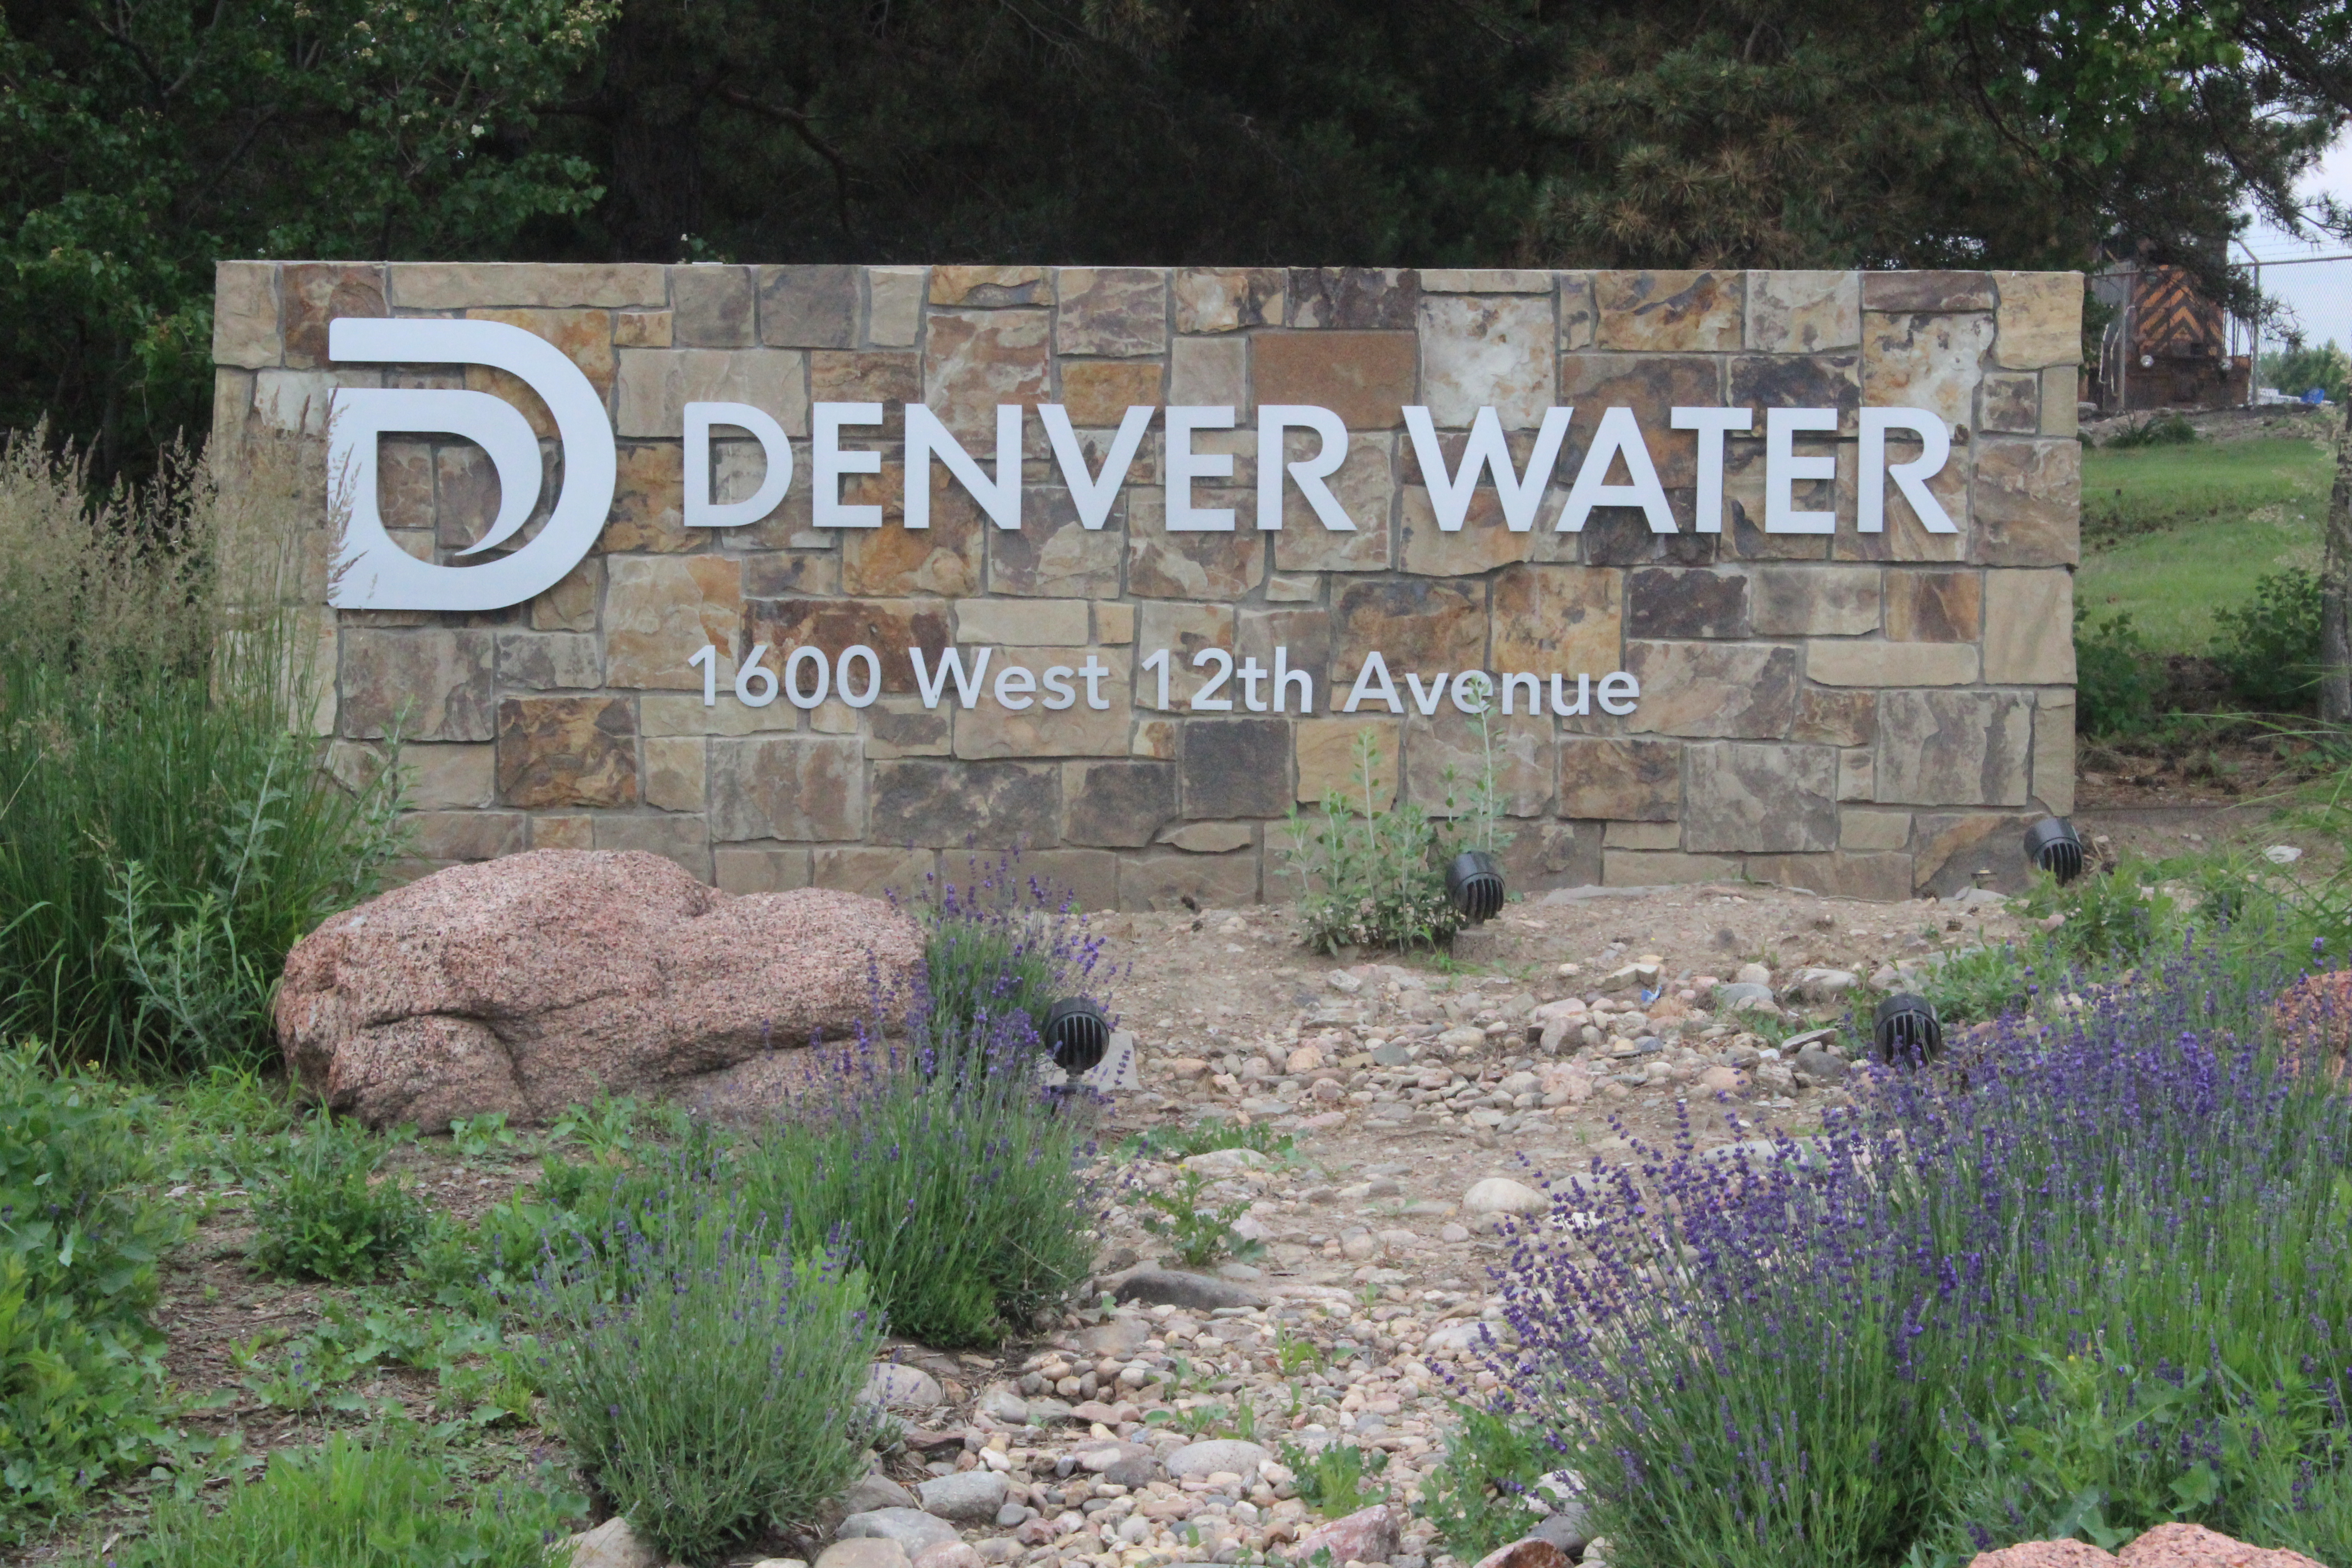 The entrance sign to Denver Water.